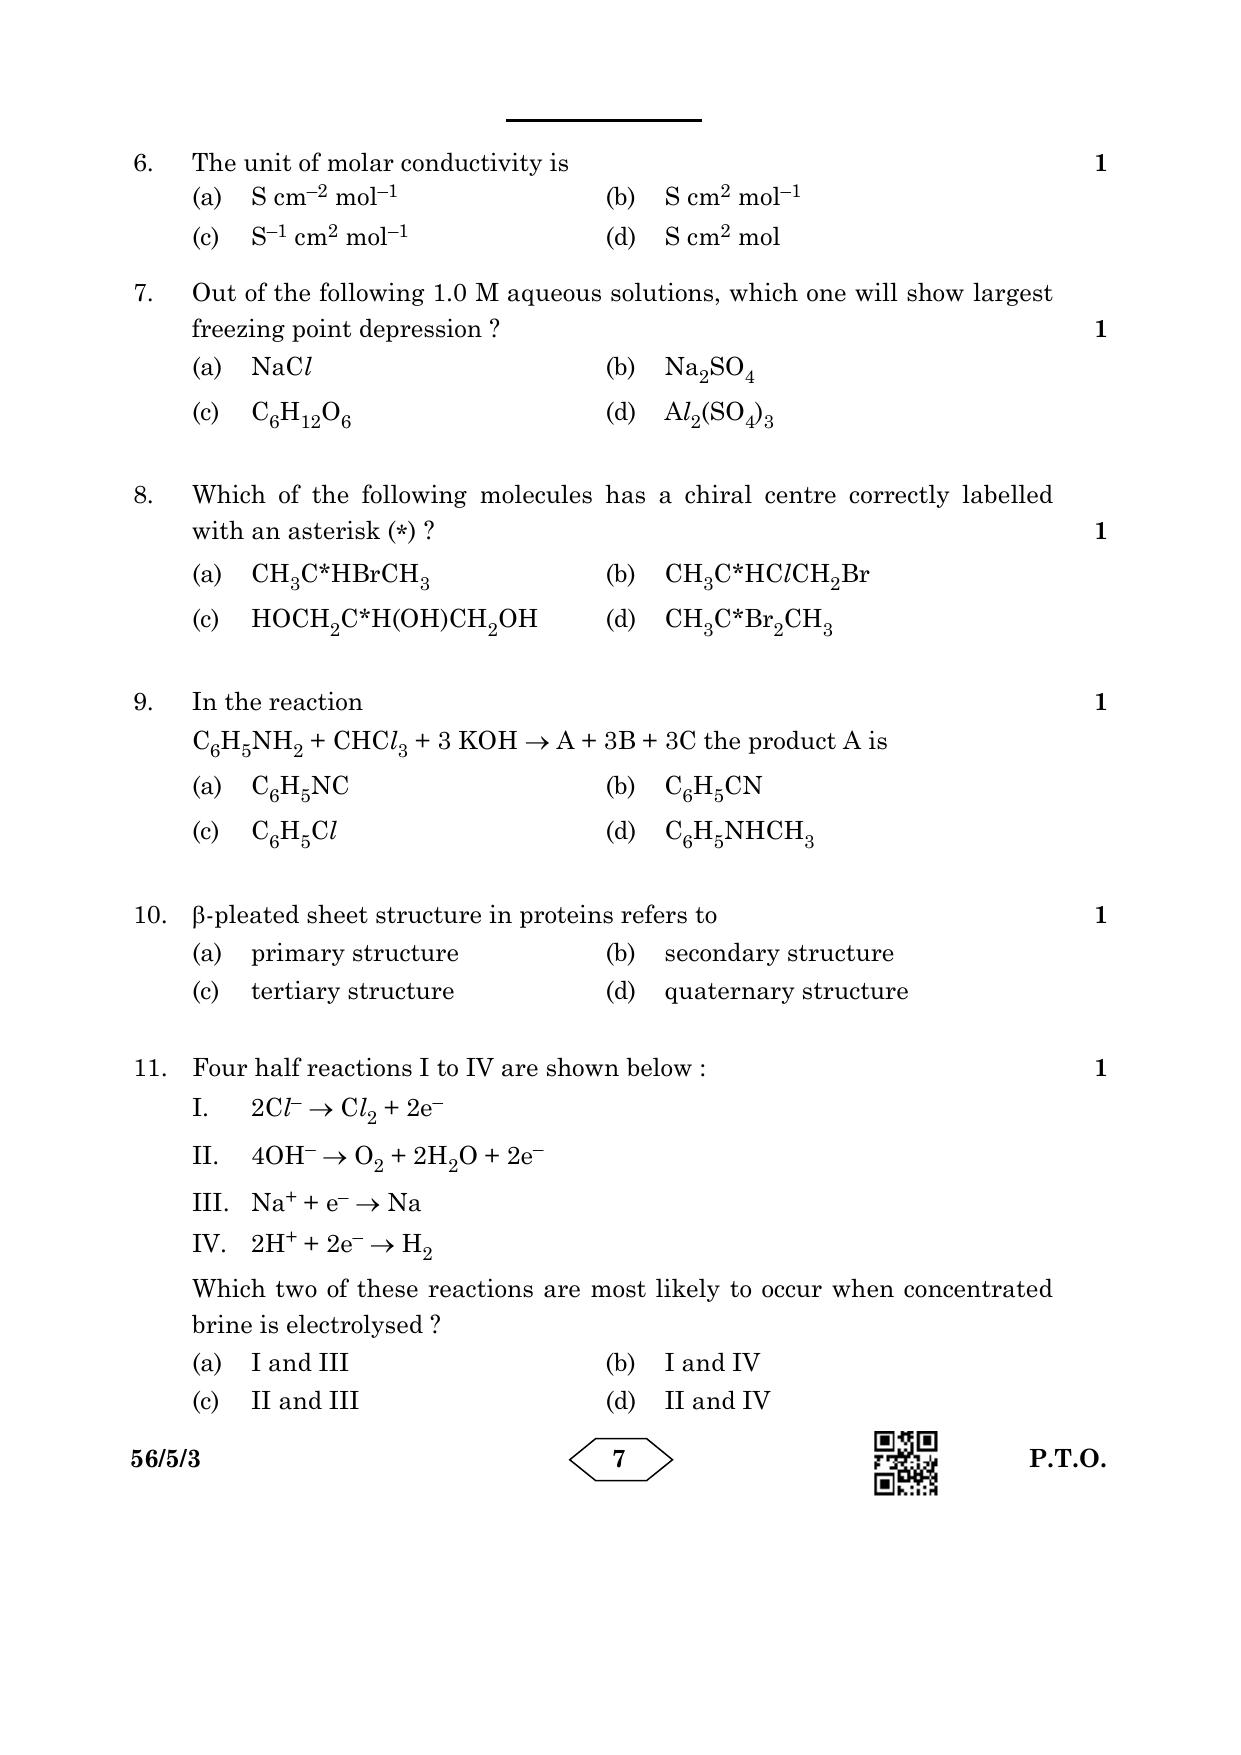 CBSE Class 12 56-5-3 Chemistry 2023 Question Paper - Page 7